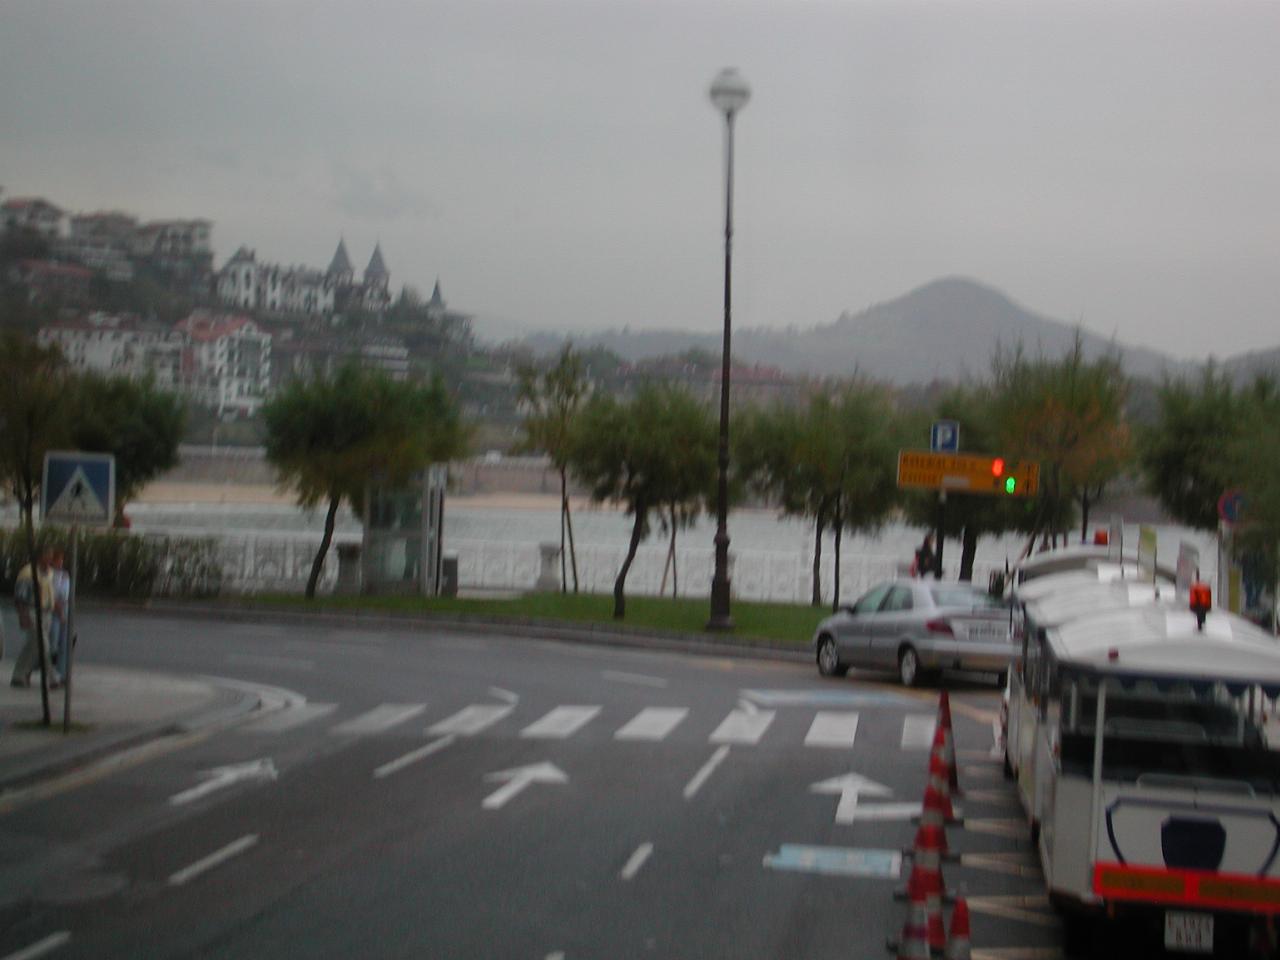 A not too well focused view of San Sebastian